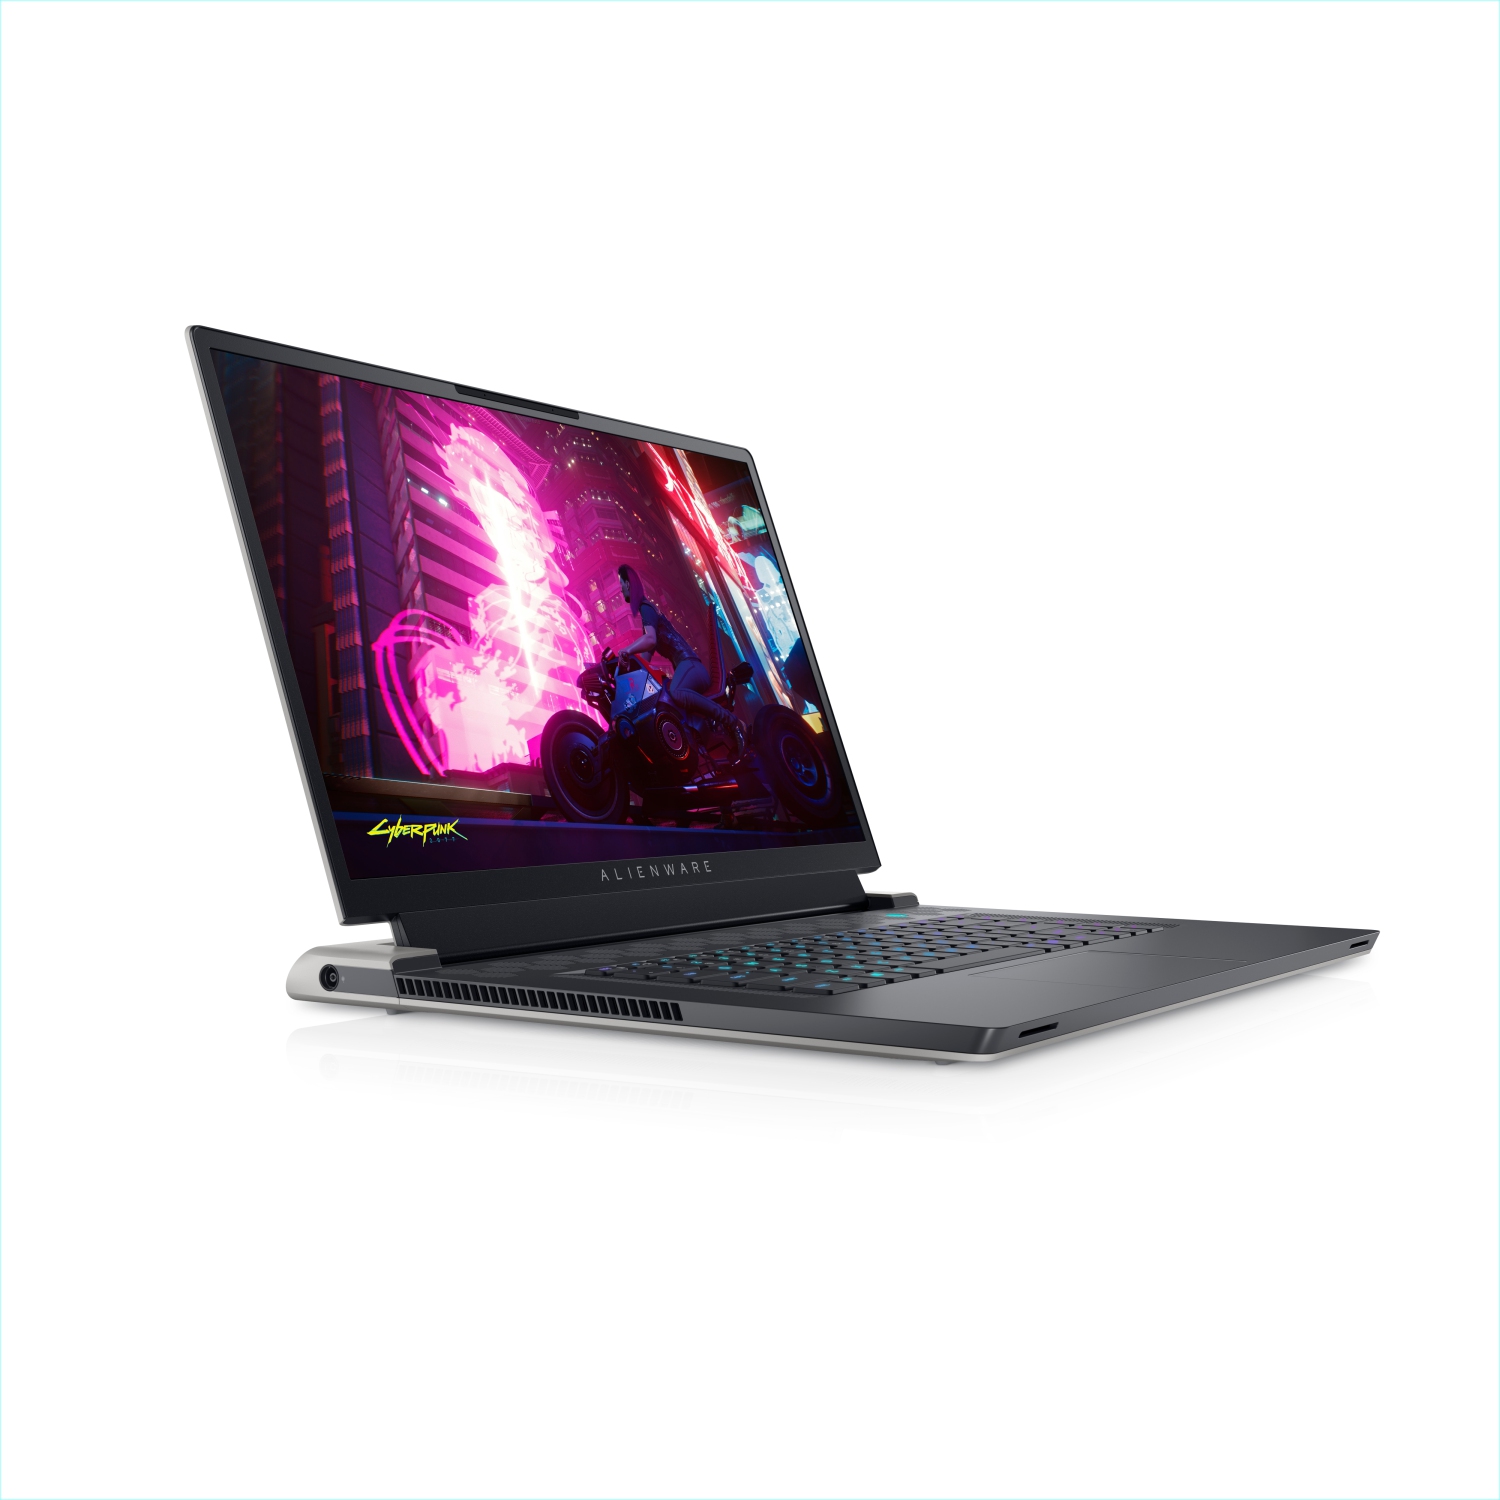 Refurbished (Excellent) – Alienware X17 R1 Gaming Laptop | 17.3" | Core i7 - - 64GB RAM - RTX 3070 | 8 Cores @ 4.6 GHz